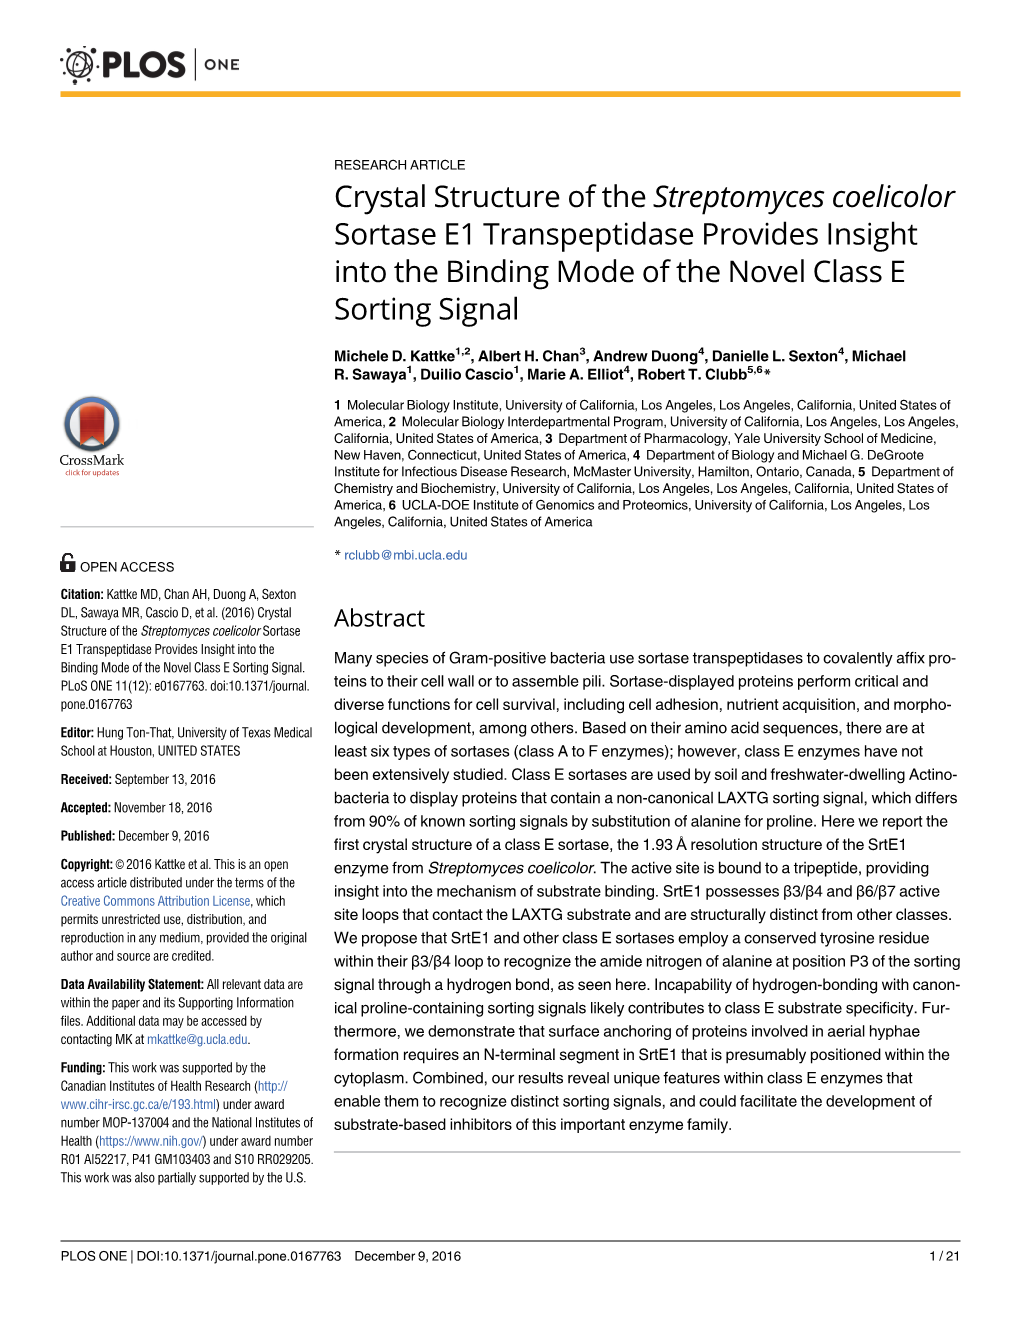 Crystal Structure of the Streptomyces Coelicolor Sortase E1 Transpeptidase Provides Insight Into the Binding Mode of the Novel Class E Sorting Signal